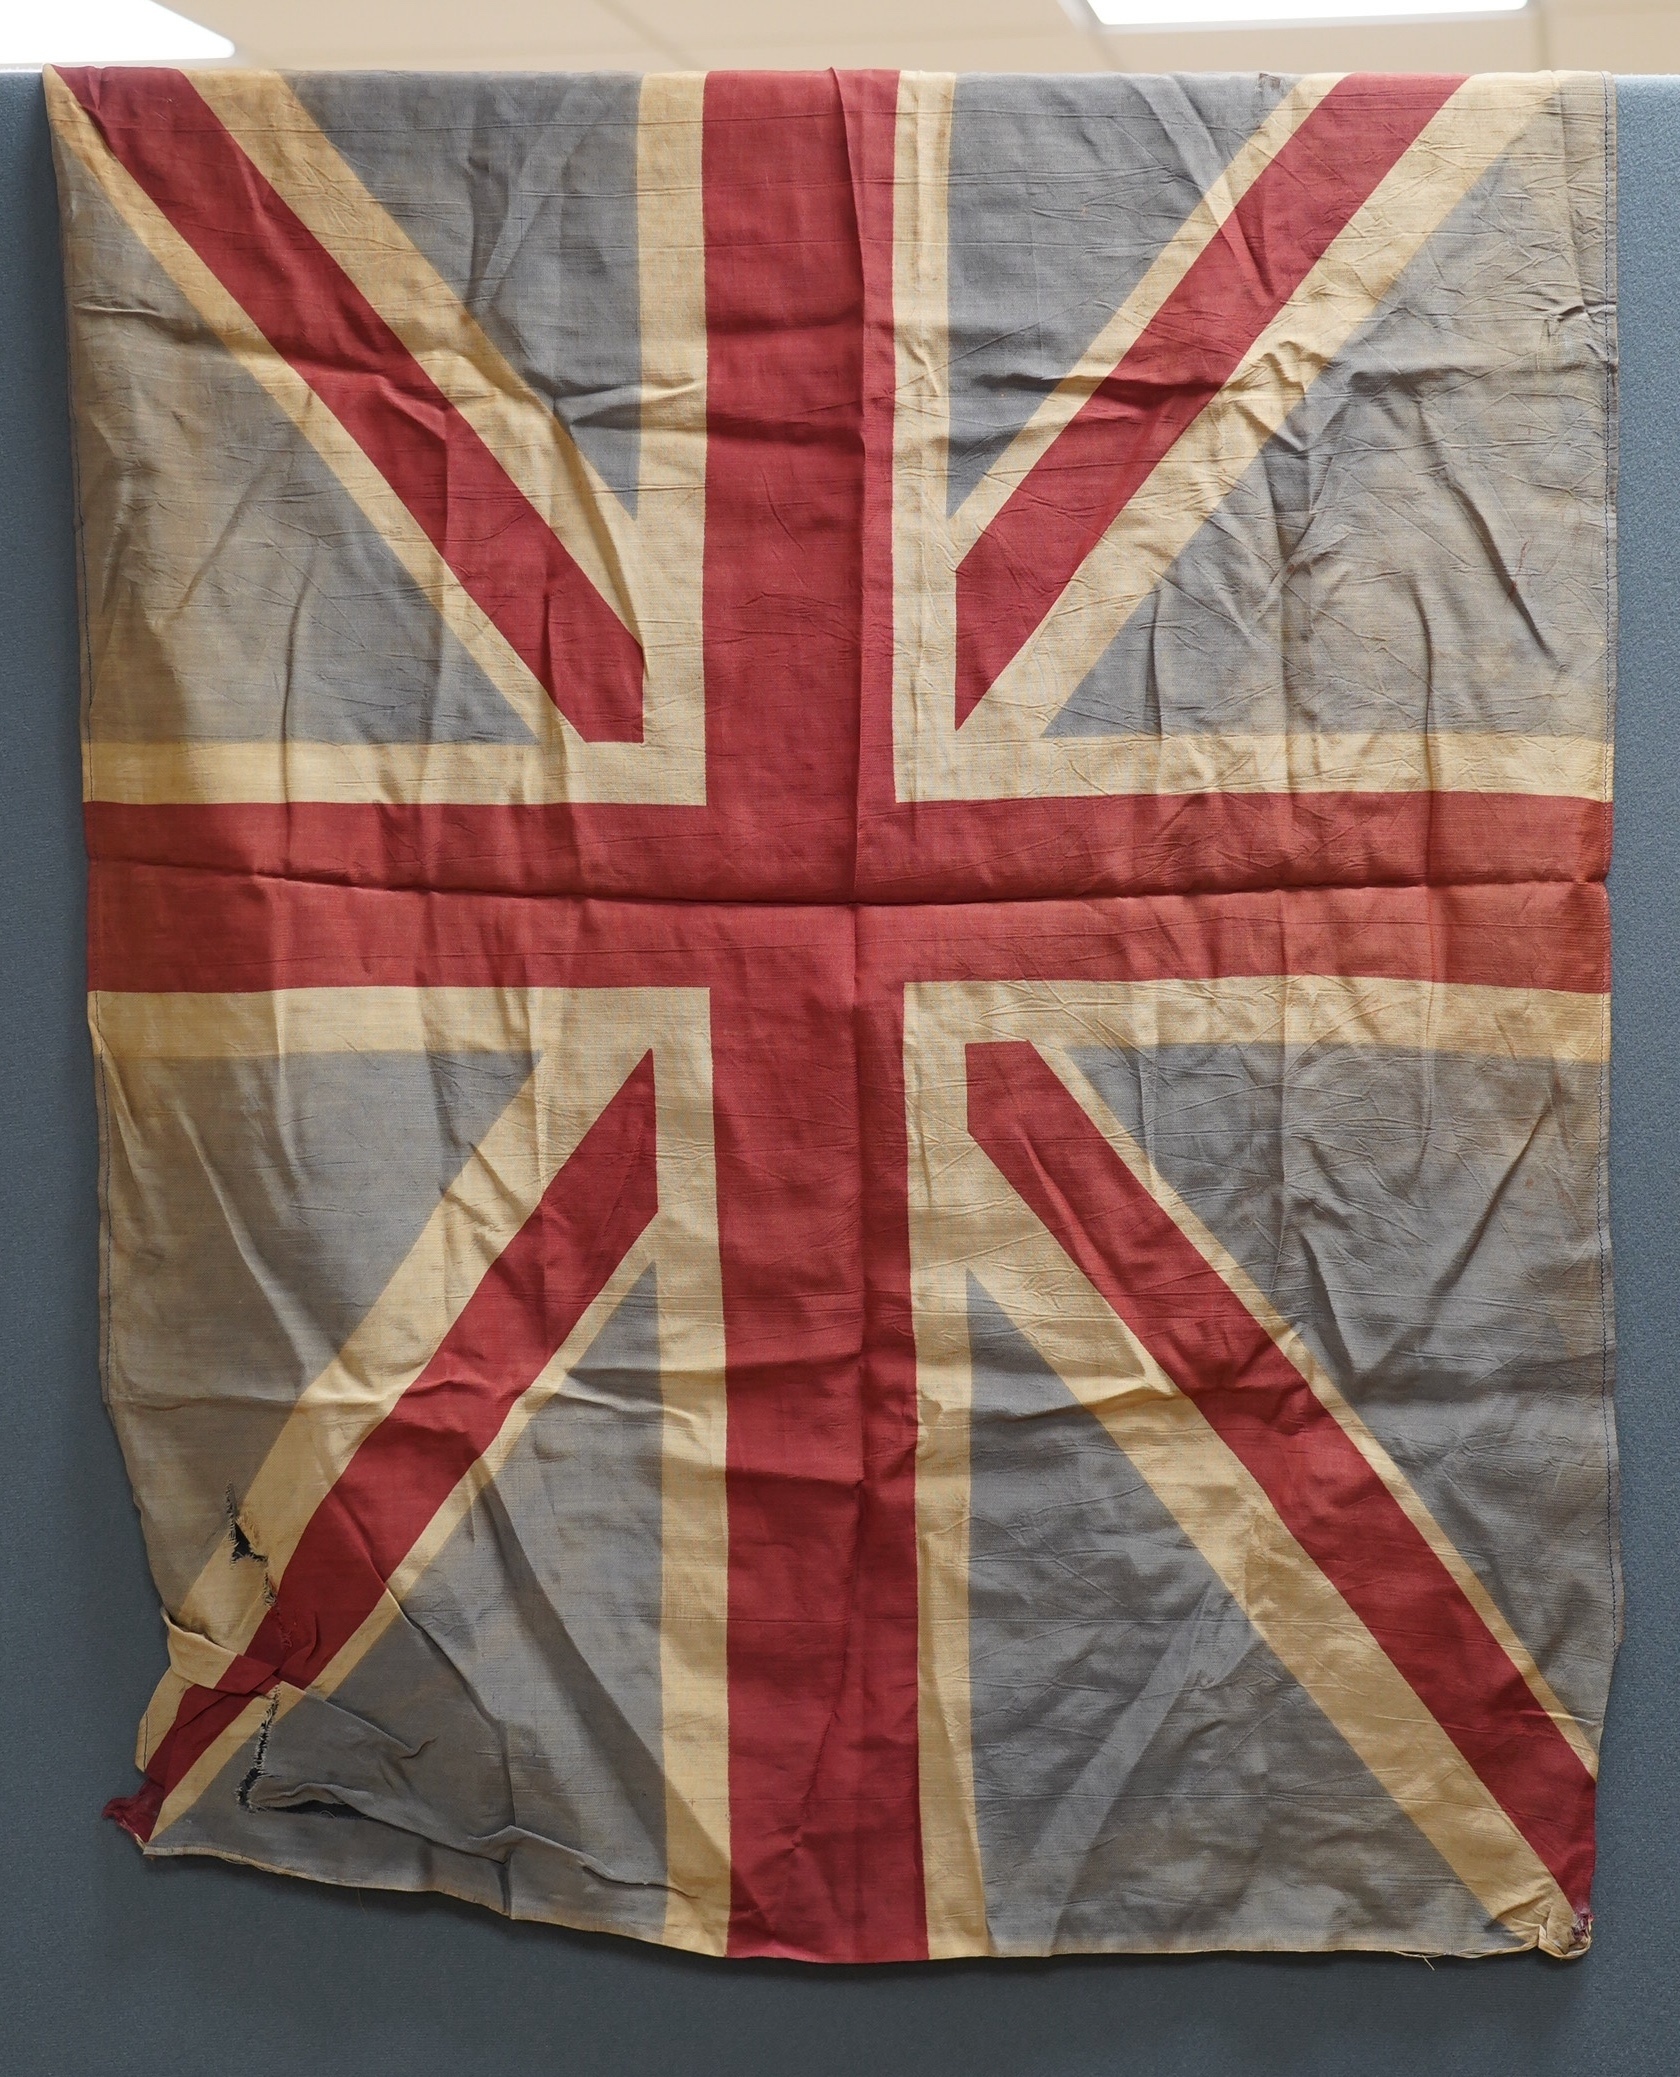 Eight mostly mid 20th century Union Jack flags, one celebrating Queen Victoria’s Diamond Jubilee, together with a Saint George’s cross and a string of Union flag bunting. Condition - poor to good